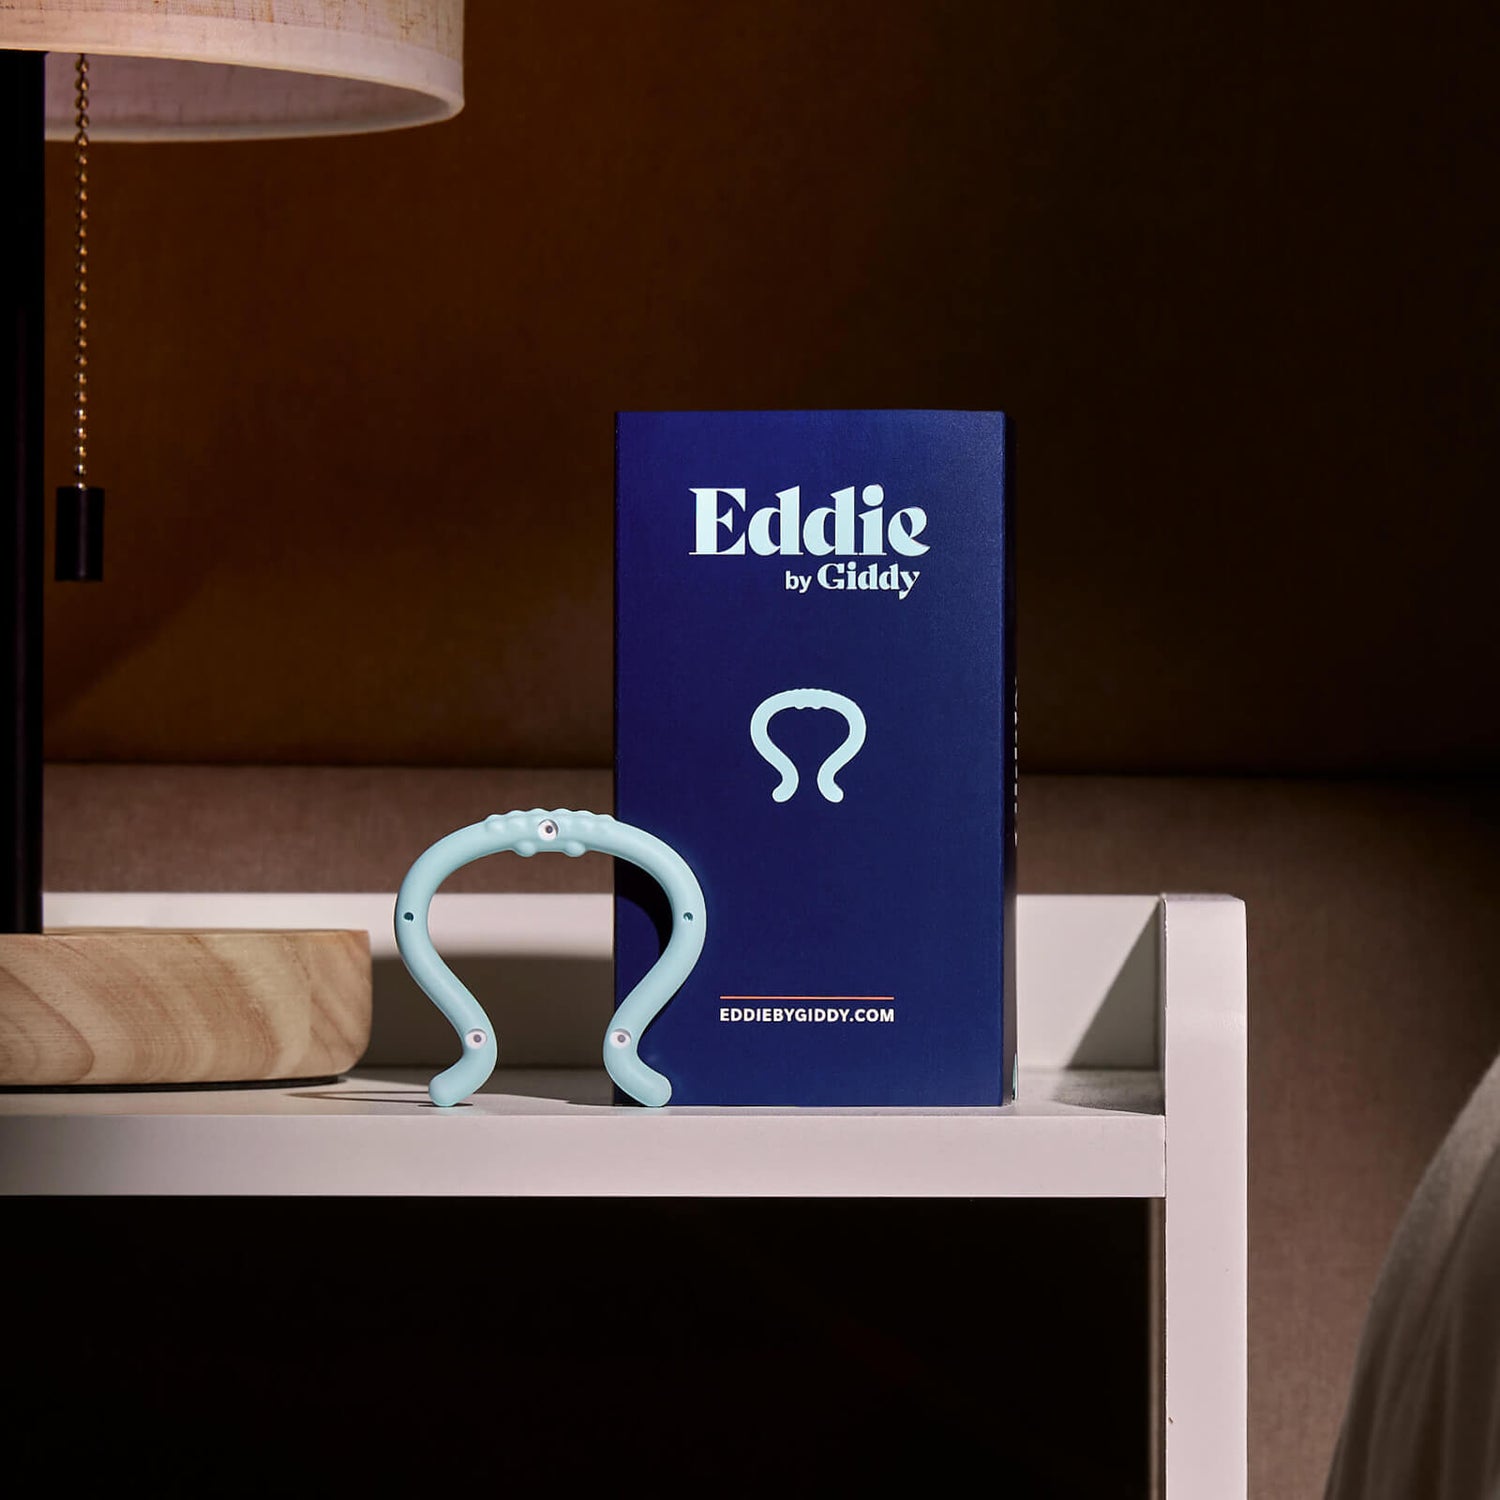 Eddie Product Box with Eddie on Nightstand Next to Lamp